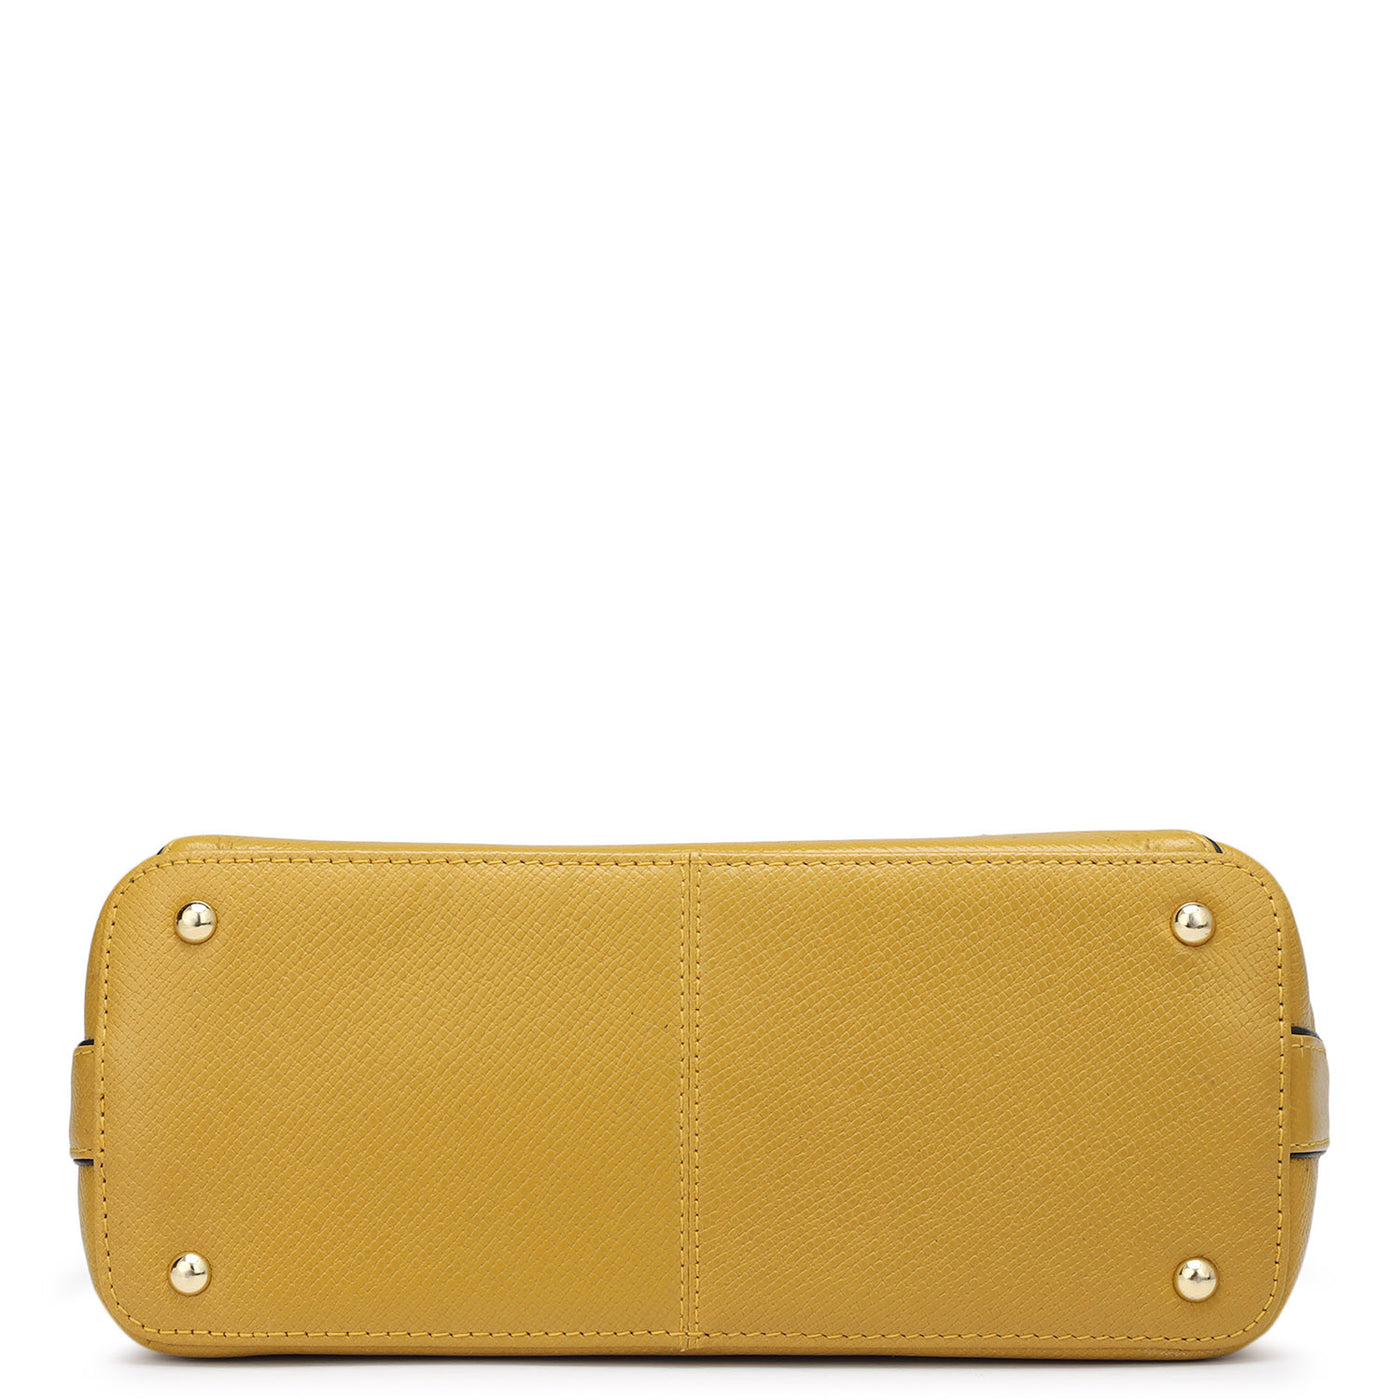 Small Franzy Leather Sling - Mustard